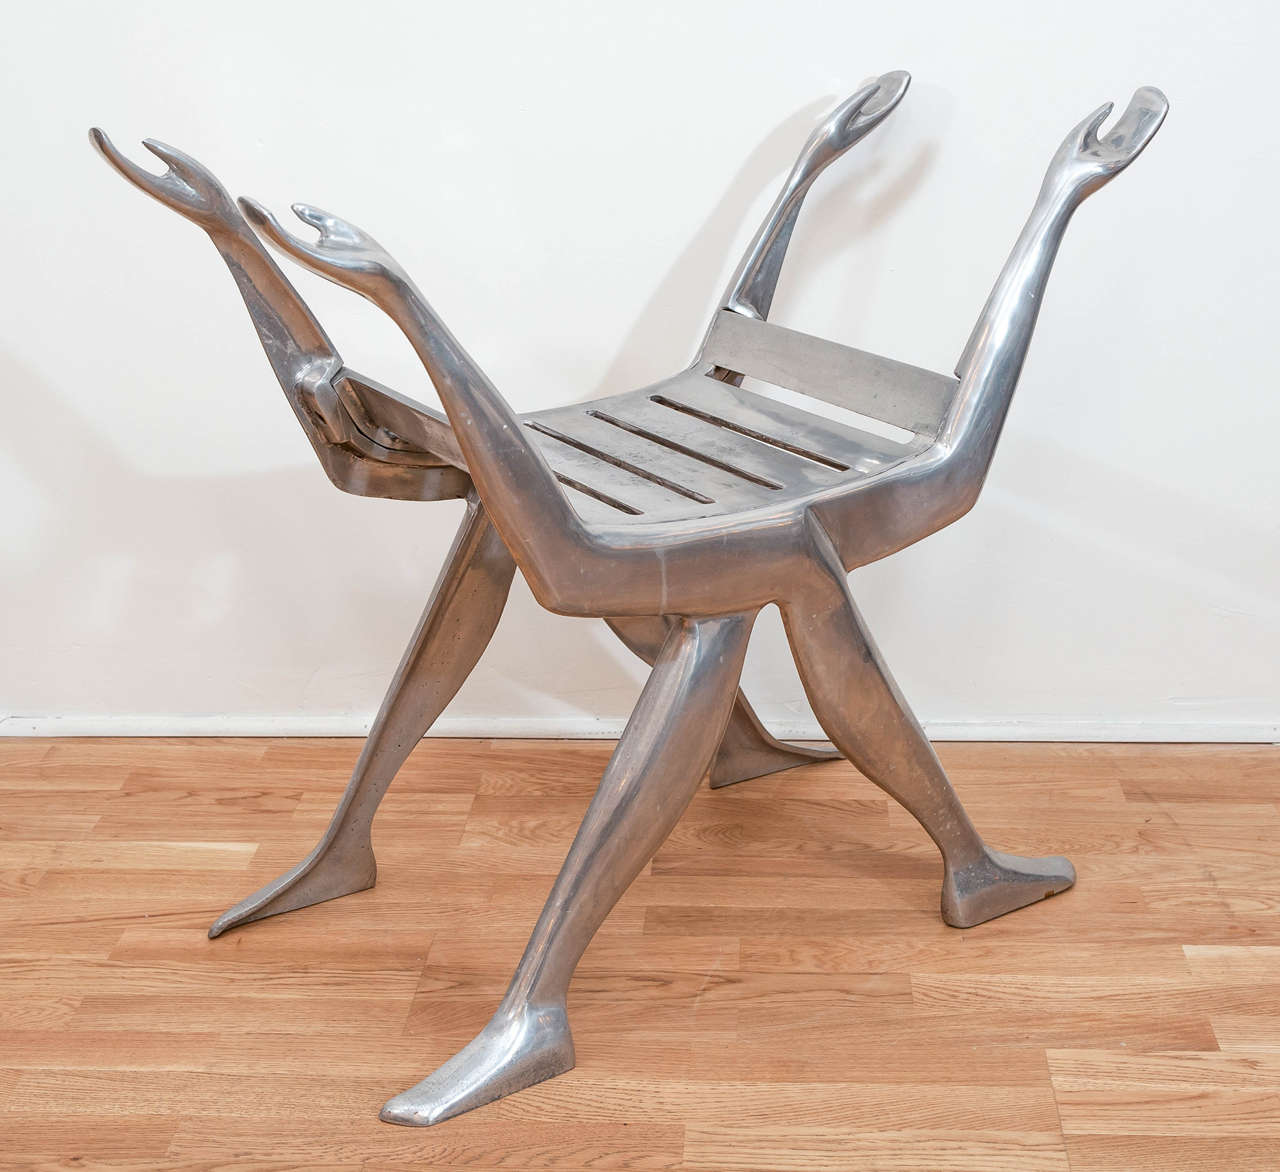 A daring and caprcious aluminum figural bench by Chicago sculptors Nancy Gensburg and Arleen Eichengreen. This functional sculpture/bench adds character and depth to any indoor or outdoor environment.